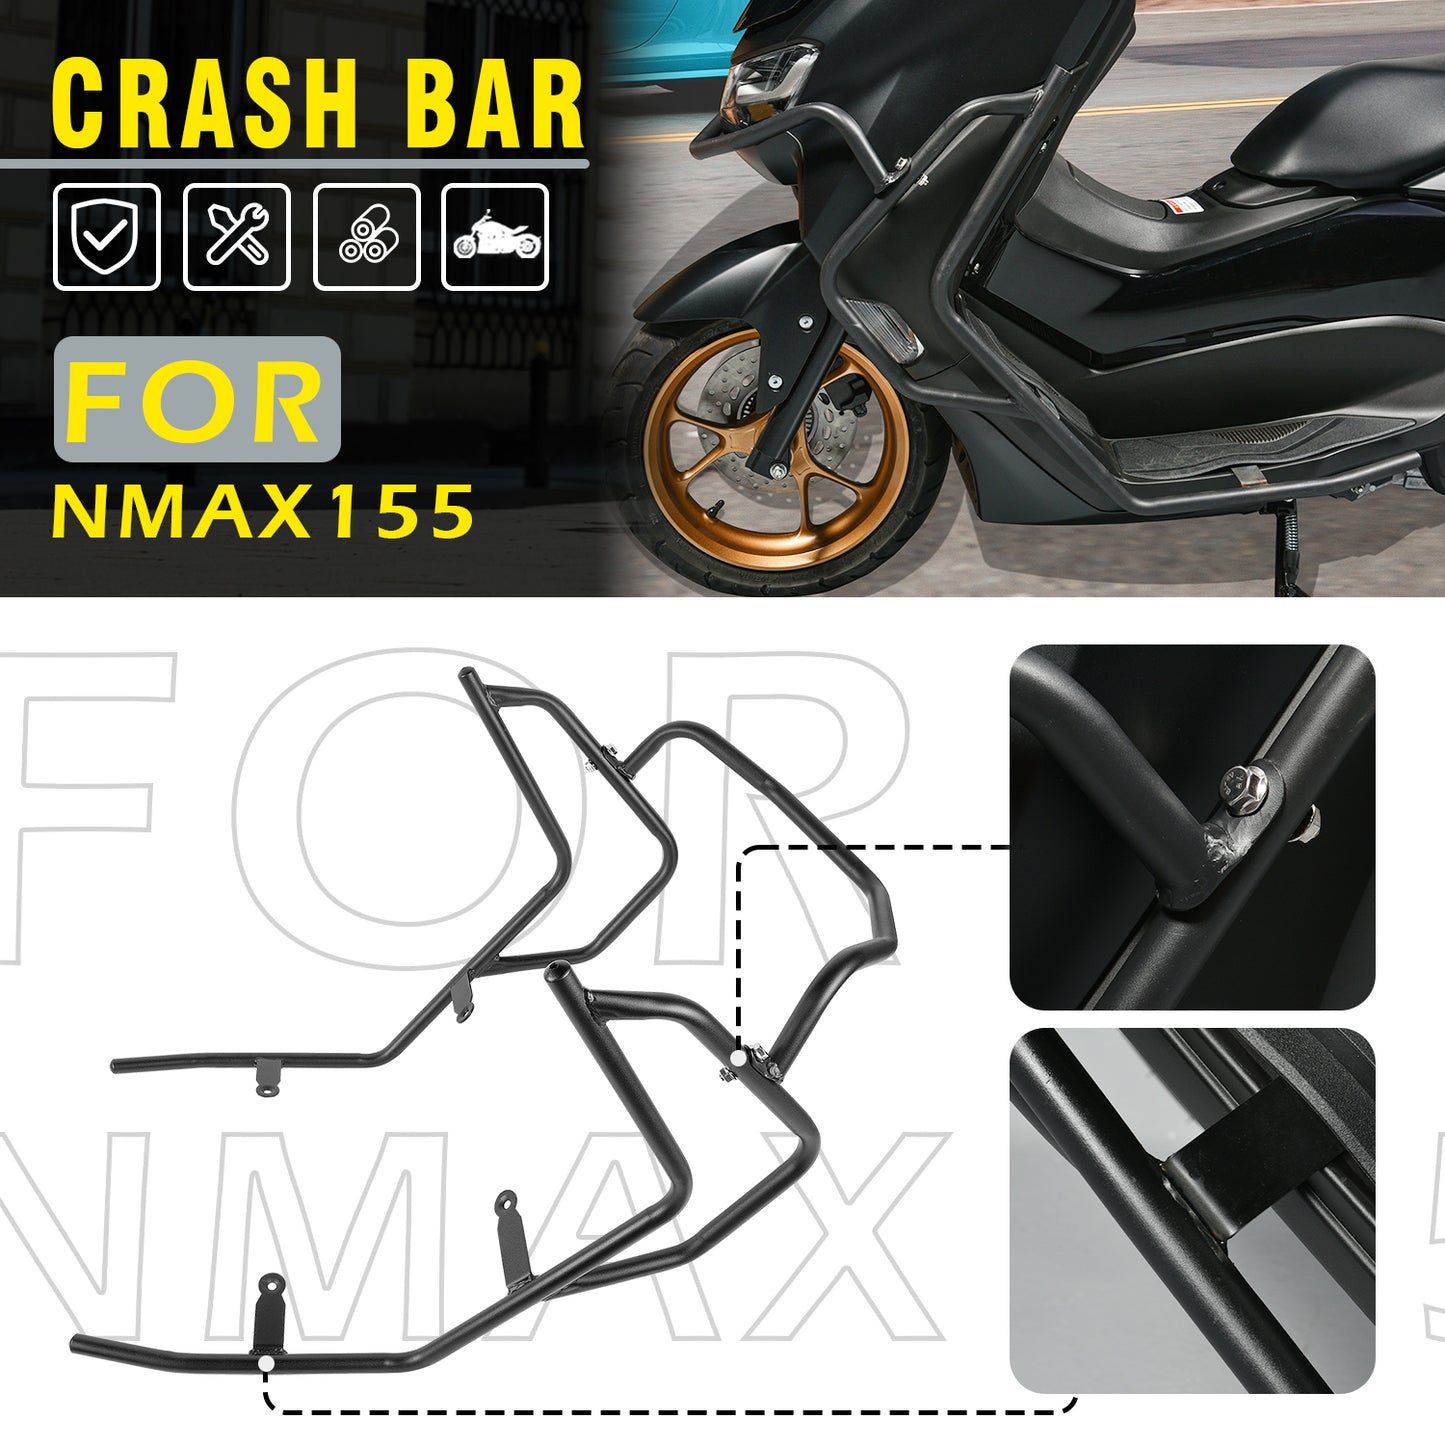 Wolfline For Yamaha NMAX 155 2021 2022 2023 Engine Guard Highway Crash Bar Bars Motorcycle Frame Protection Bumper NMAX155 Accessories